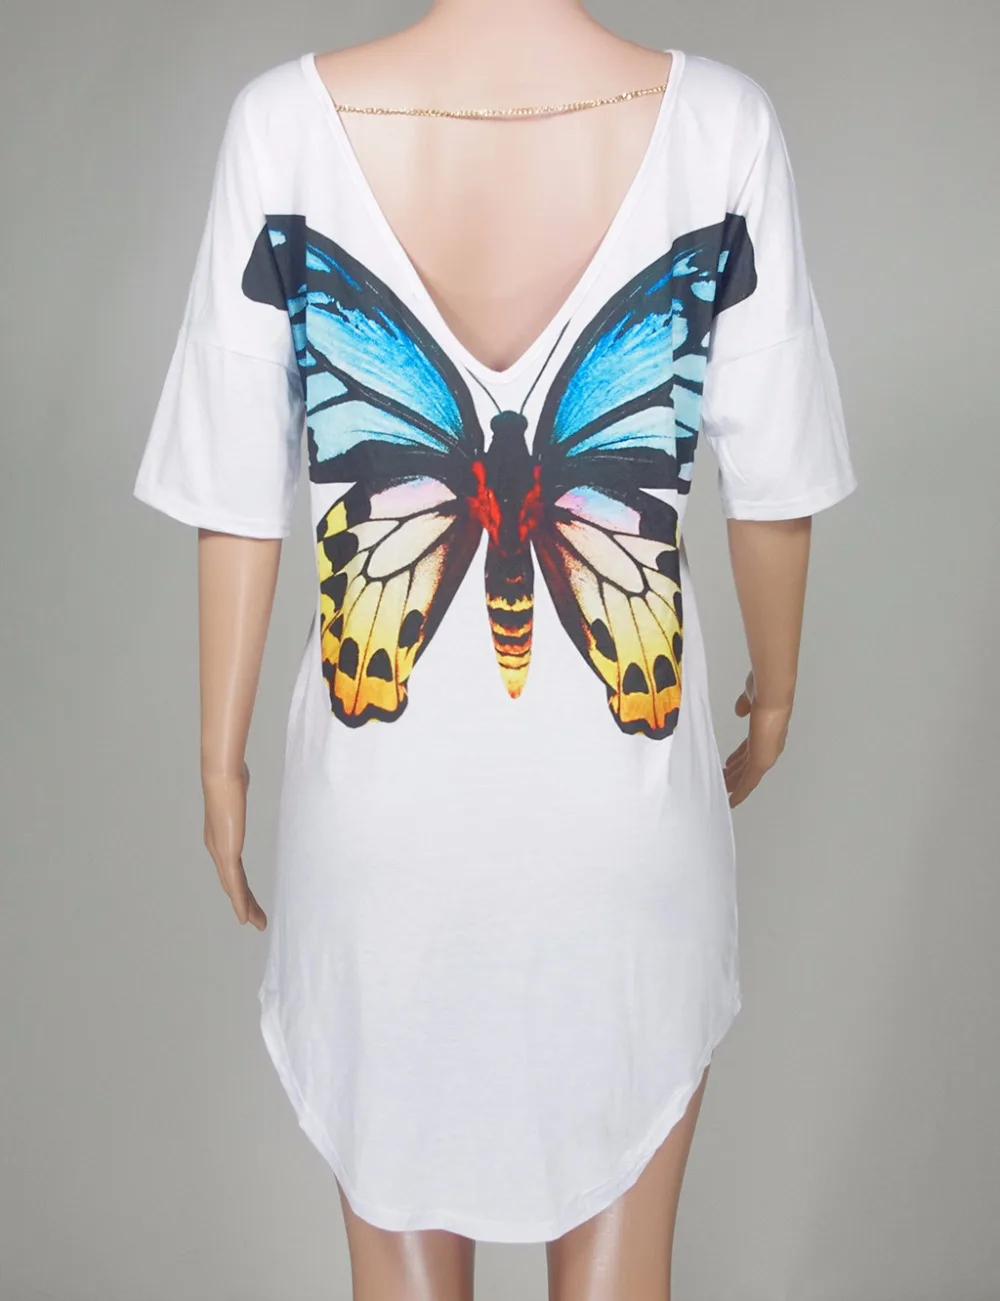 2018 Casual cat butterfly printed O Neck V backless short sleeve Loose white mini dress womens fashion dresses summer women long sleeve maxi dress